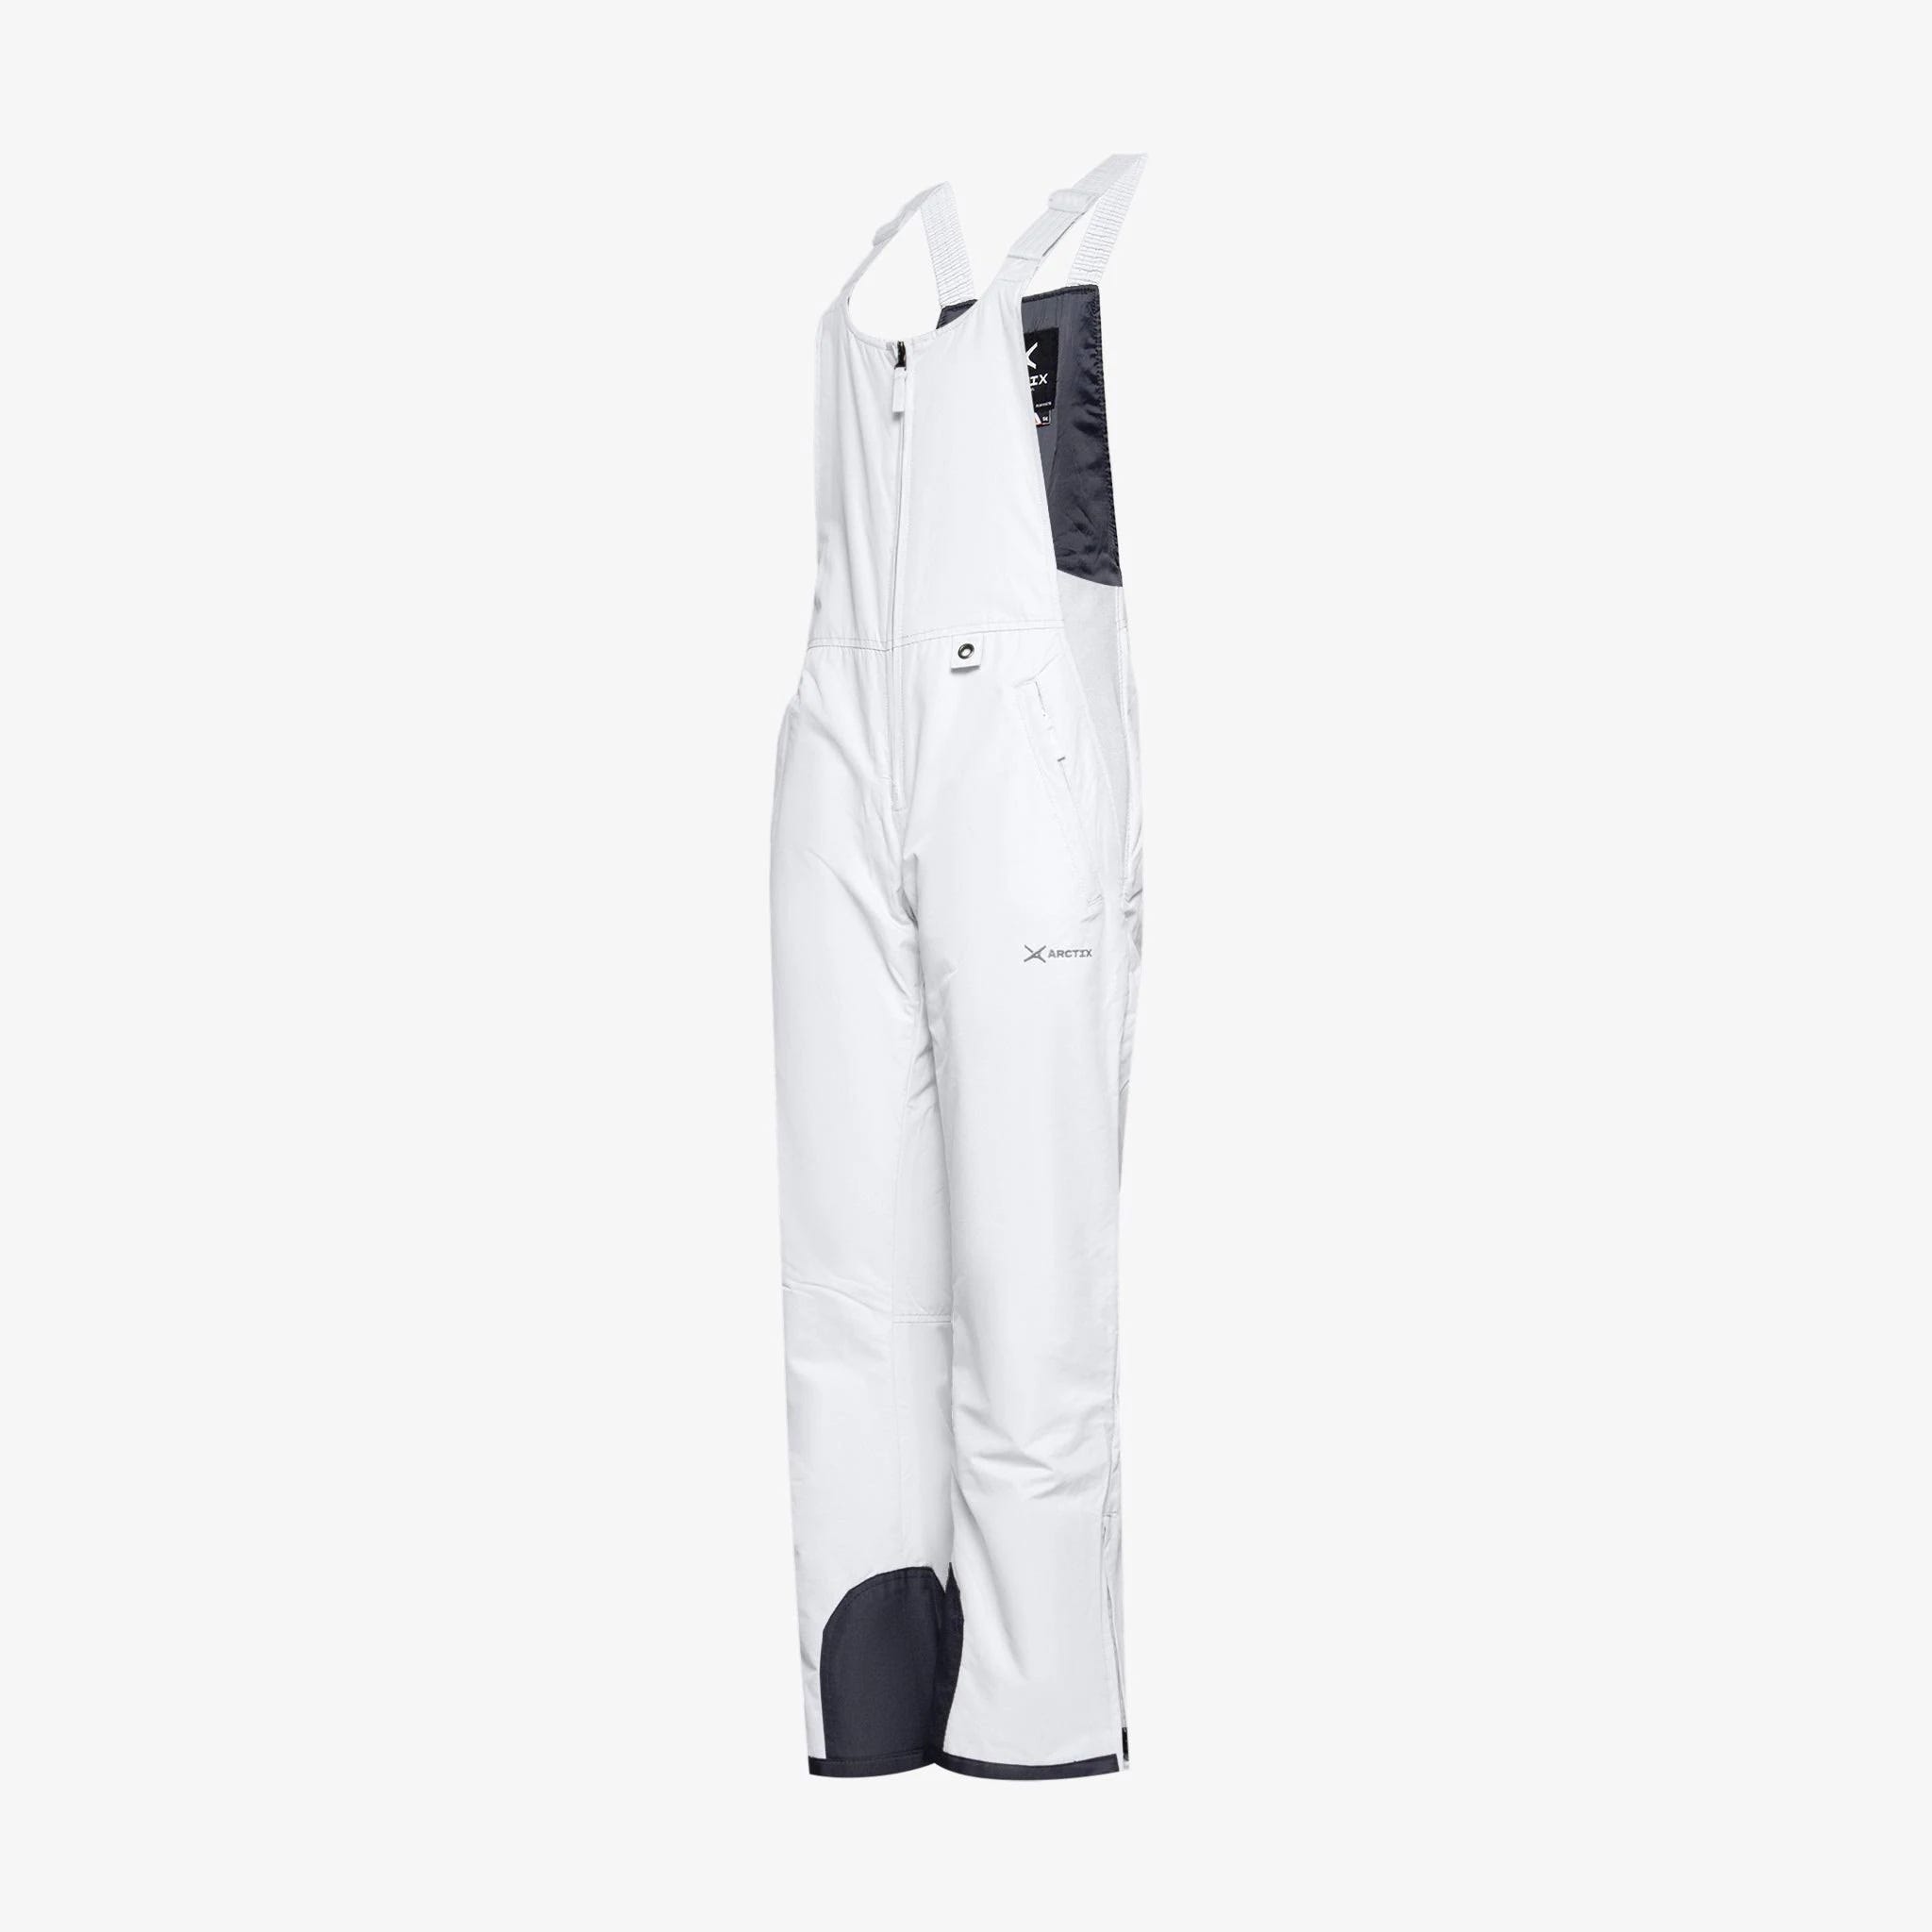 Women's Insulated Bib Overalls for Cold Weather | Image